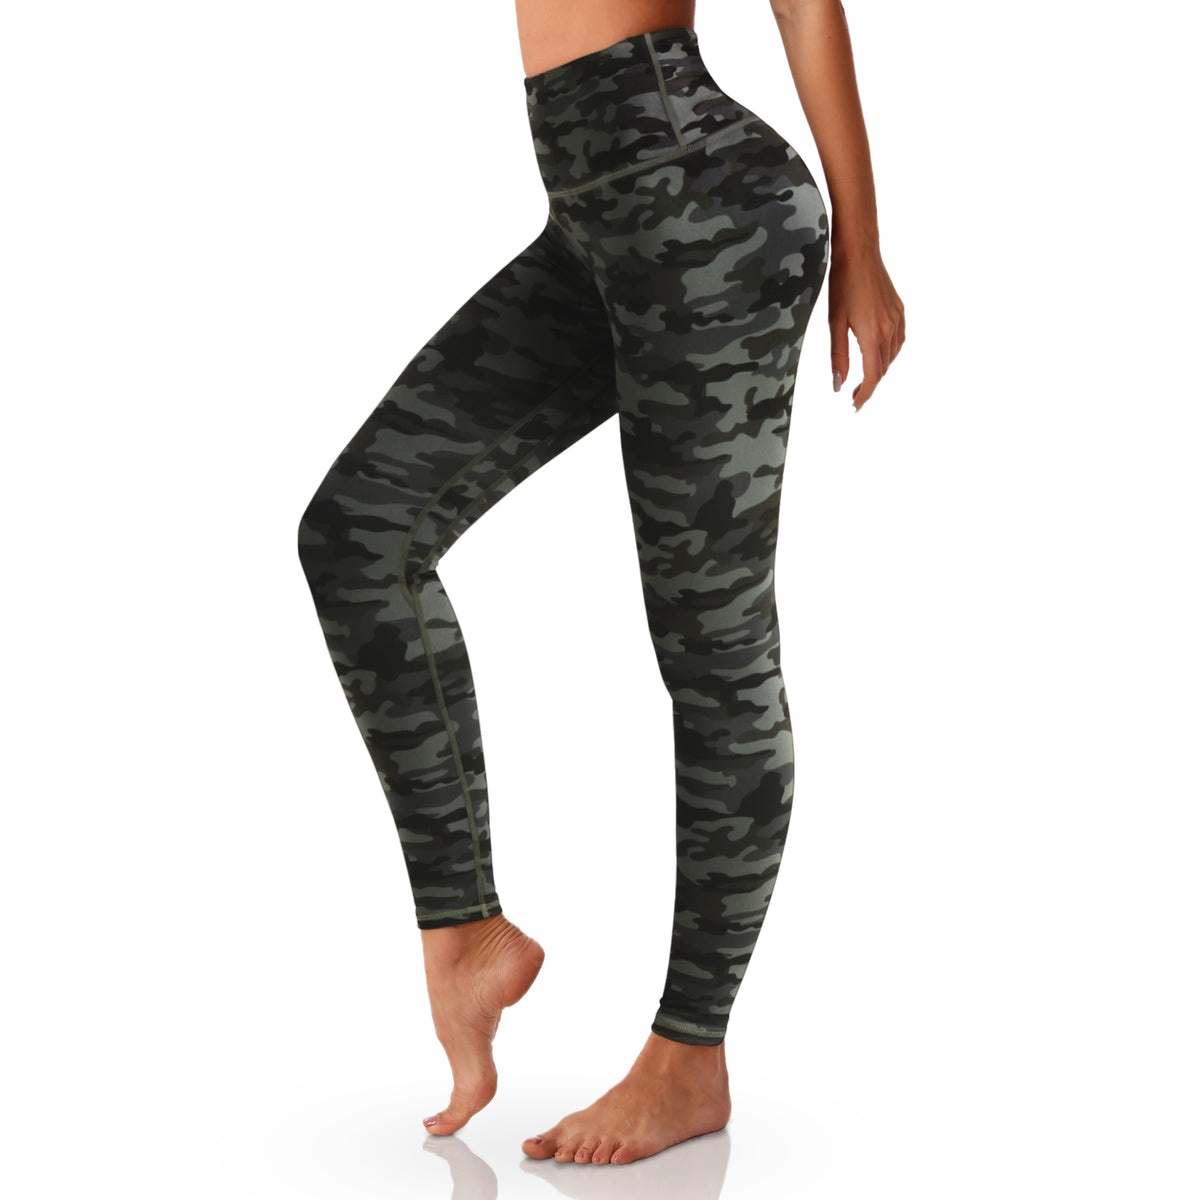 WOMEN'S HIGH WAIST LEGGINGS WITH POCKET ES4 - CABRALLY